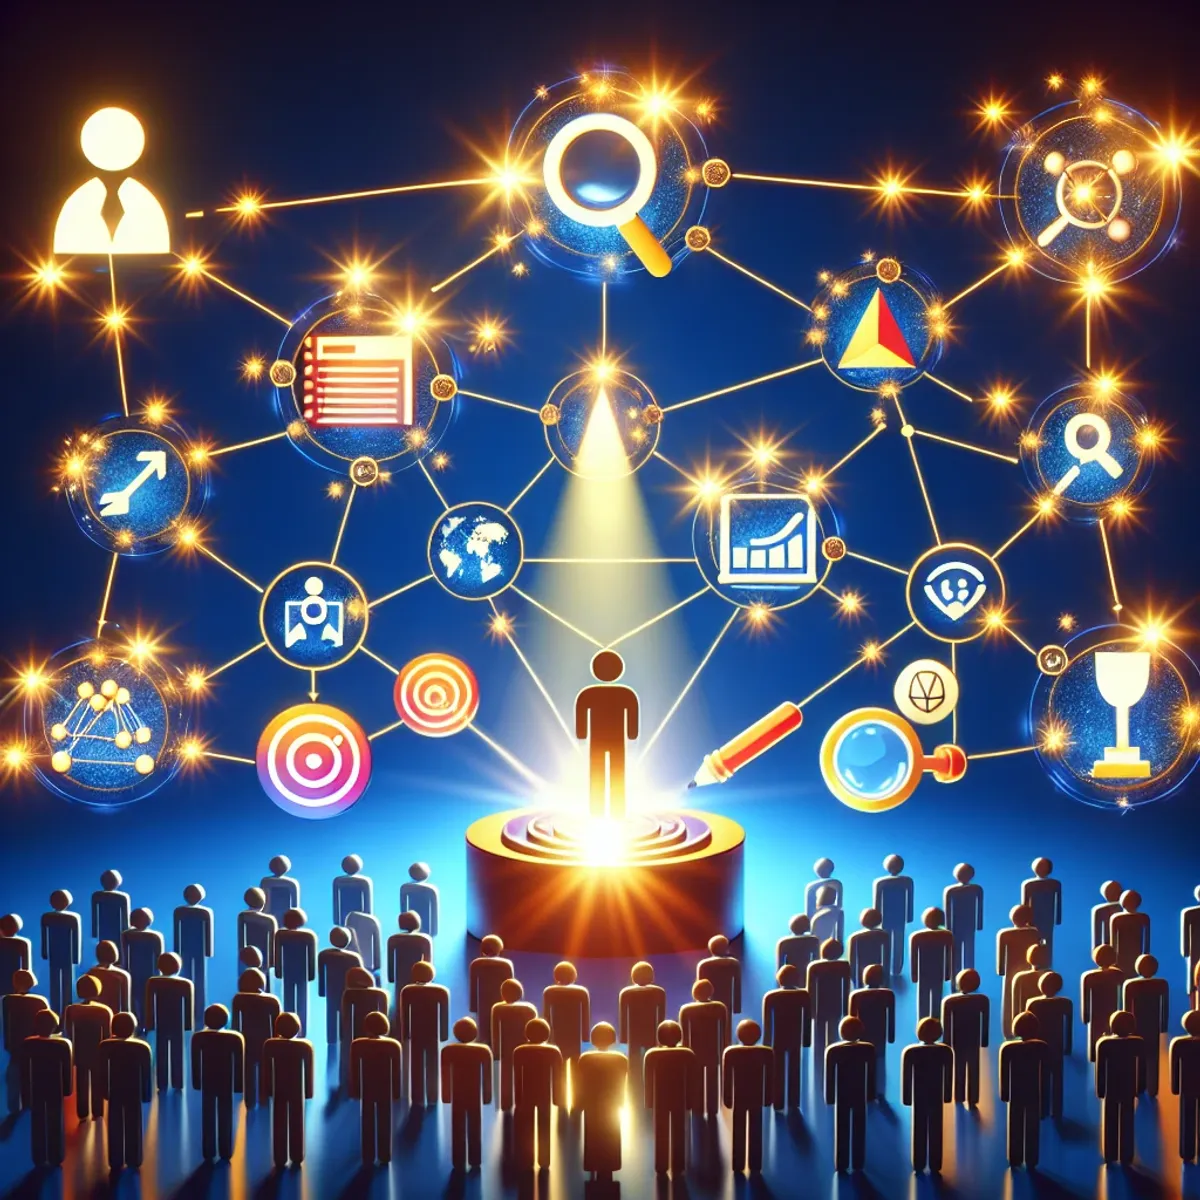 A digital marketing strategy visualized as interconnected clusters with symbols representing satisfied user experience, engaged audience, improved search engine rankings, and enhanced SERP visibility.